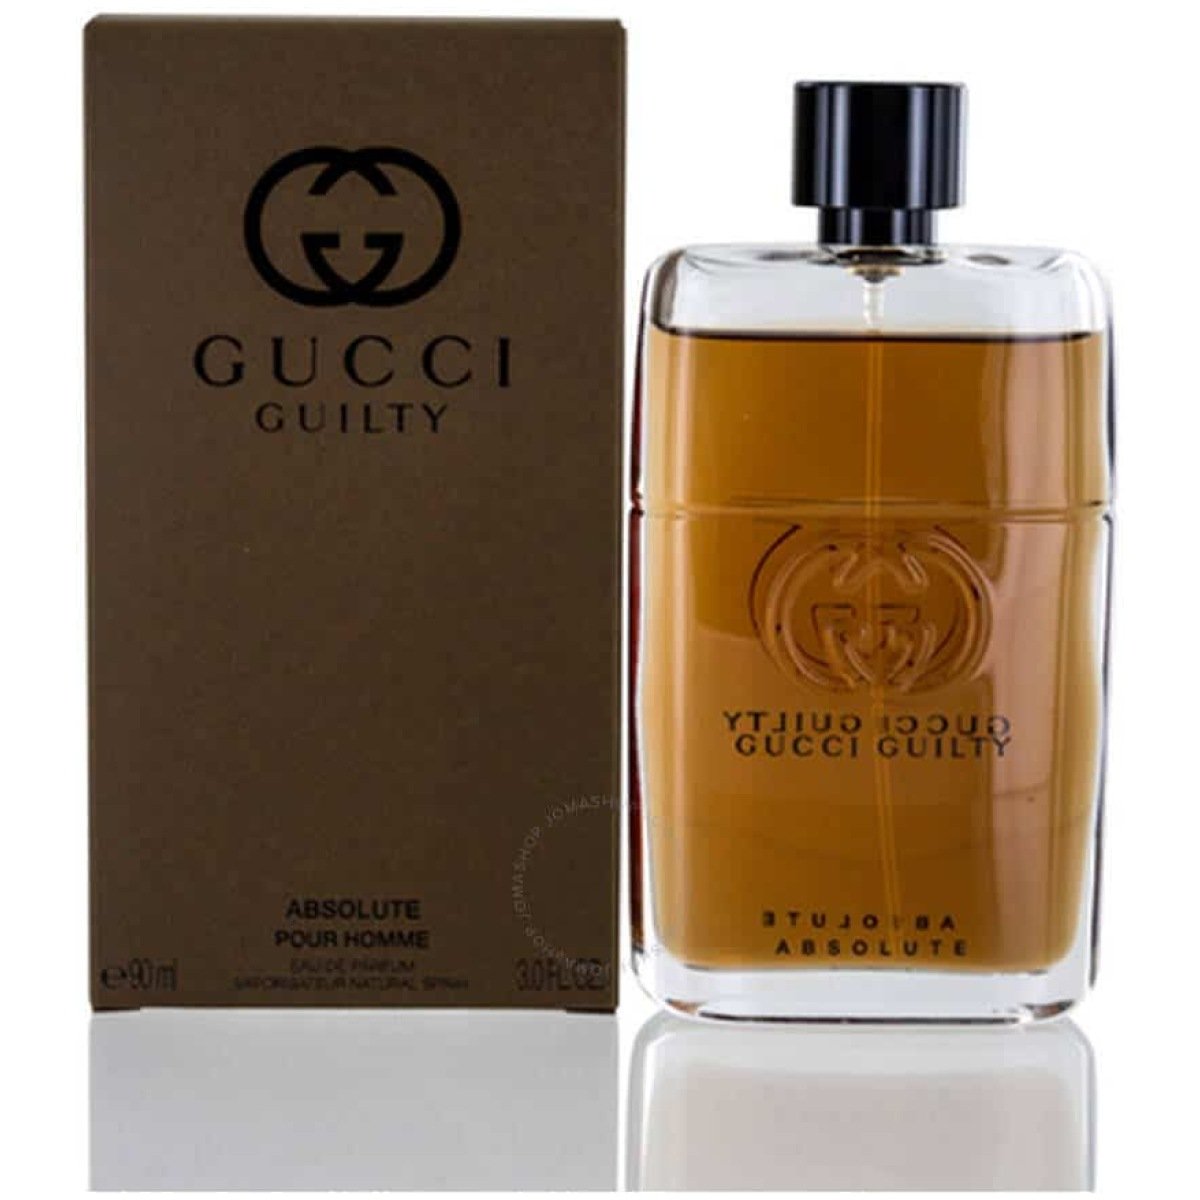 Gucci Guilty Absolute Pour Homme EDP Perfume For Men 90 ml